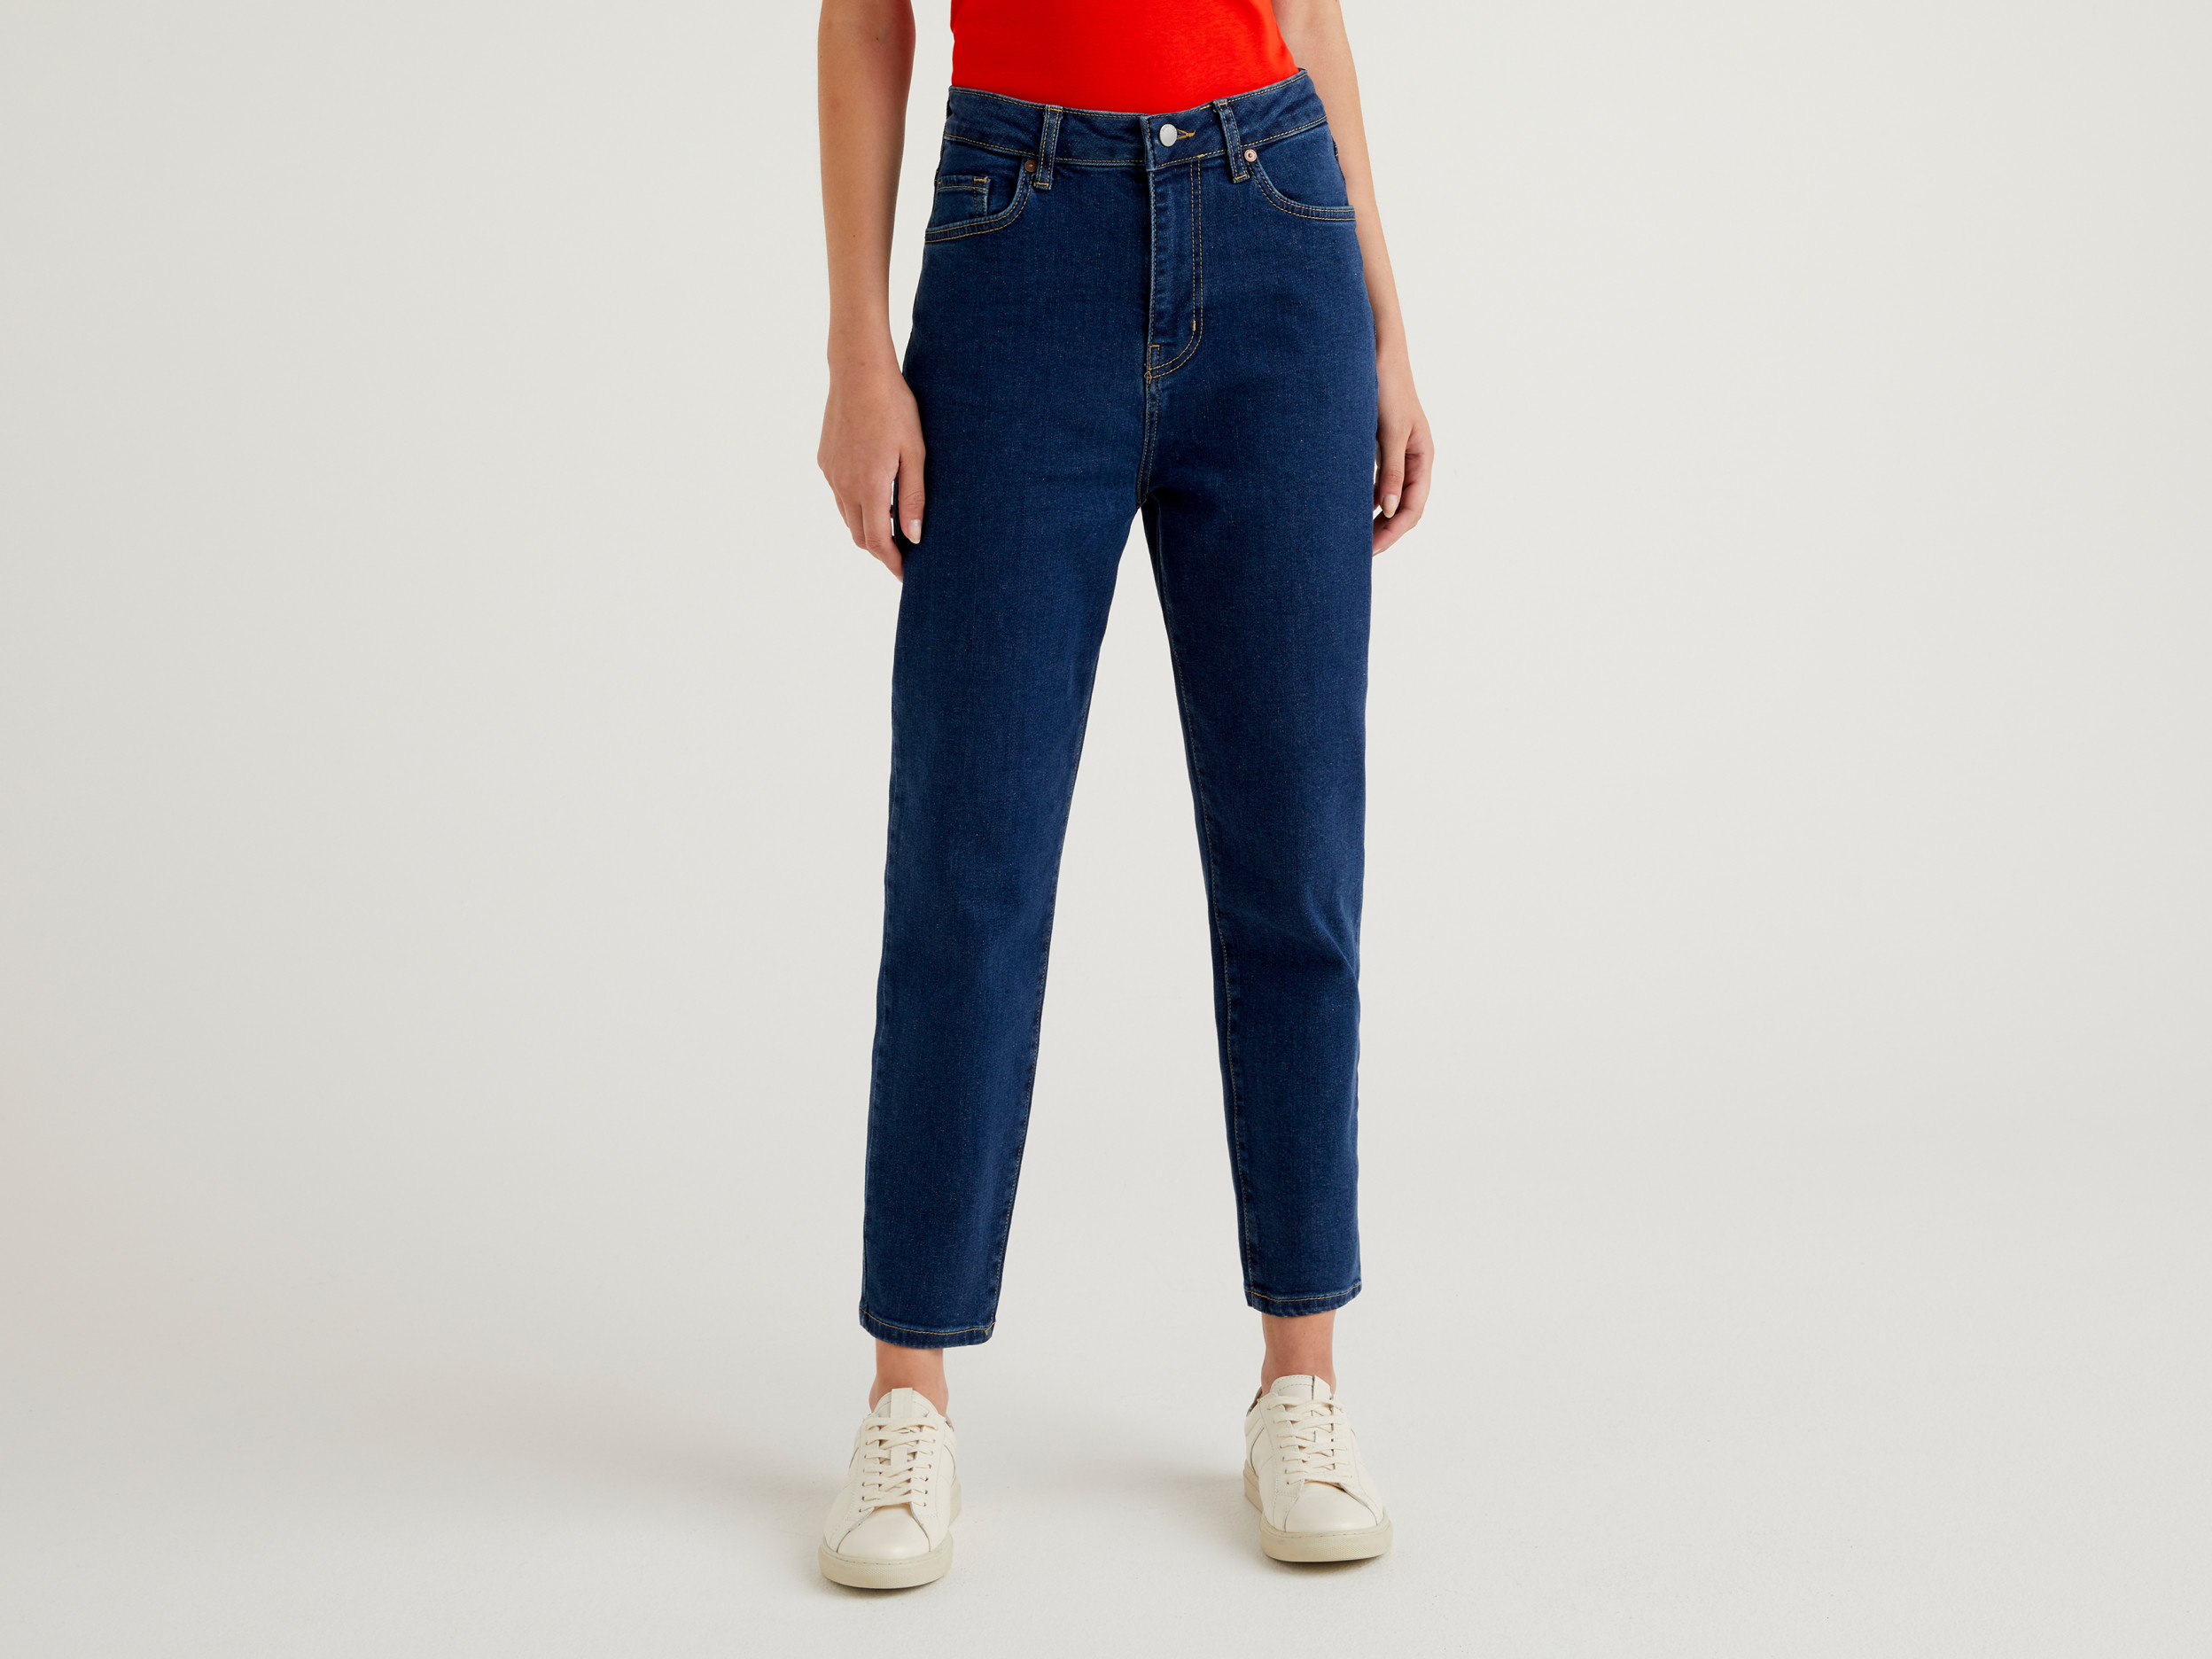 Benetton, Jeans Cropped Mom Fit, taille 34, Bleu, Femme